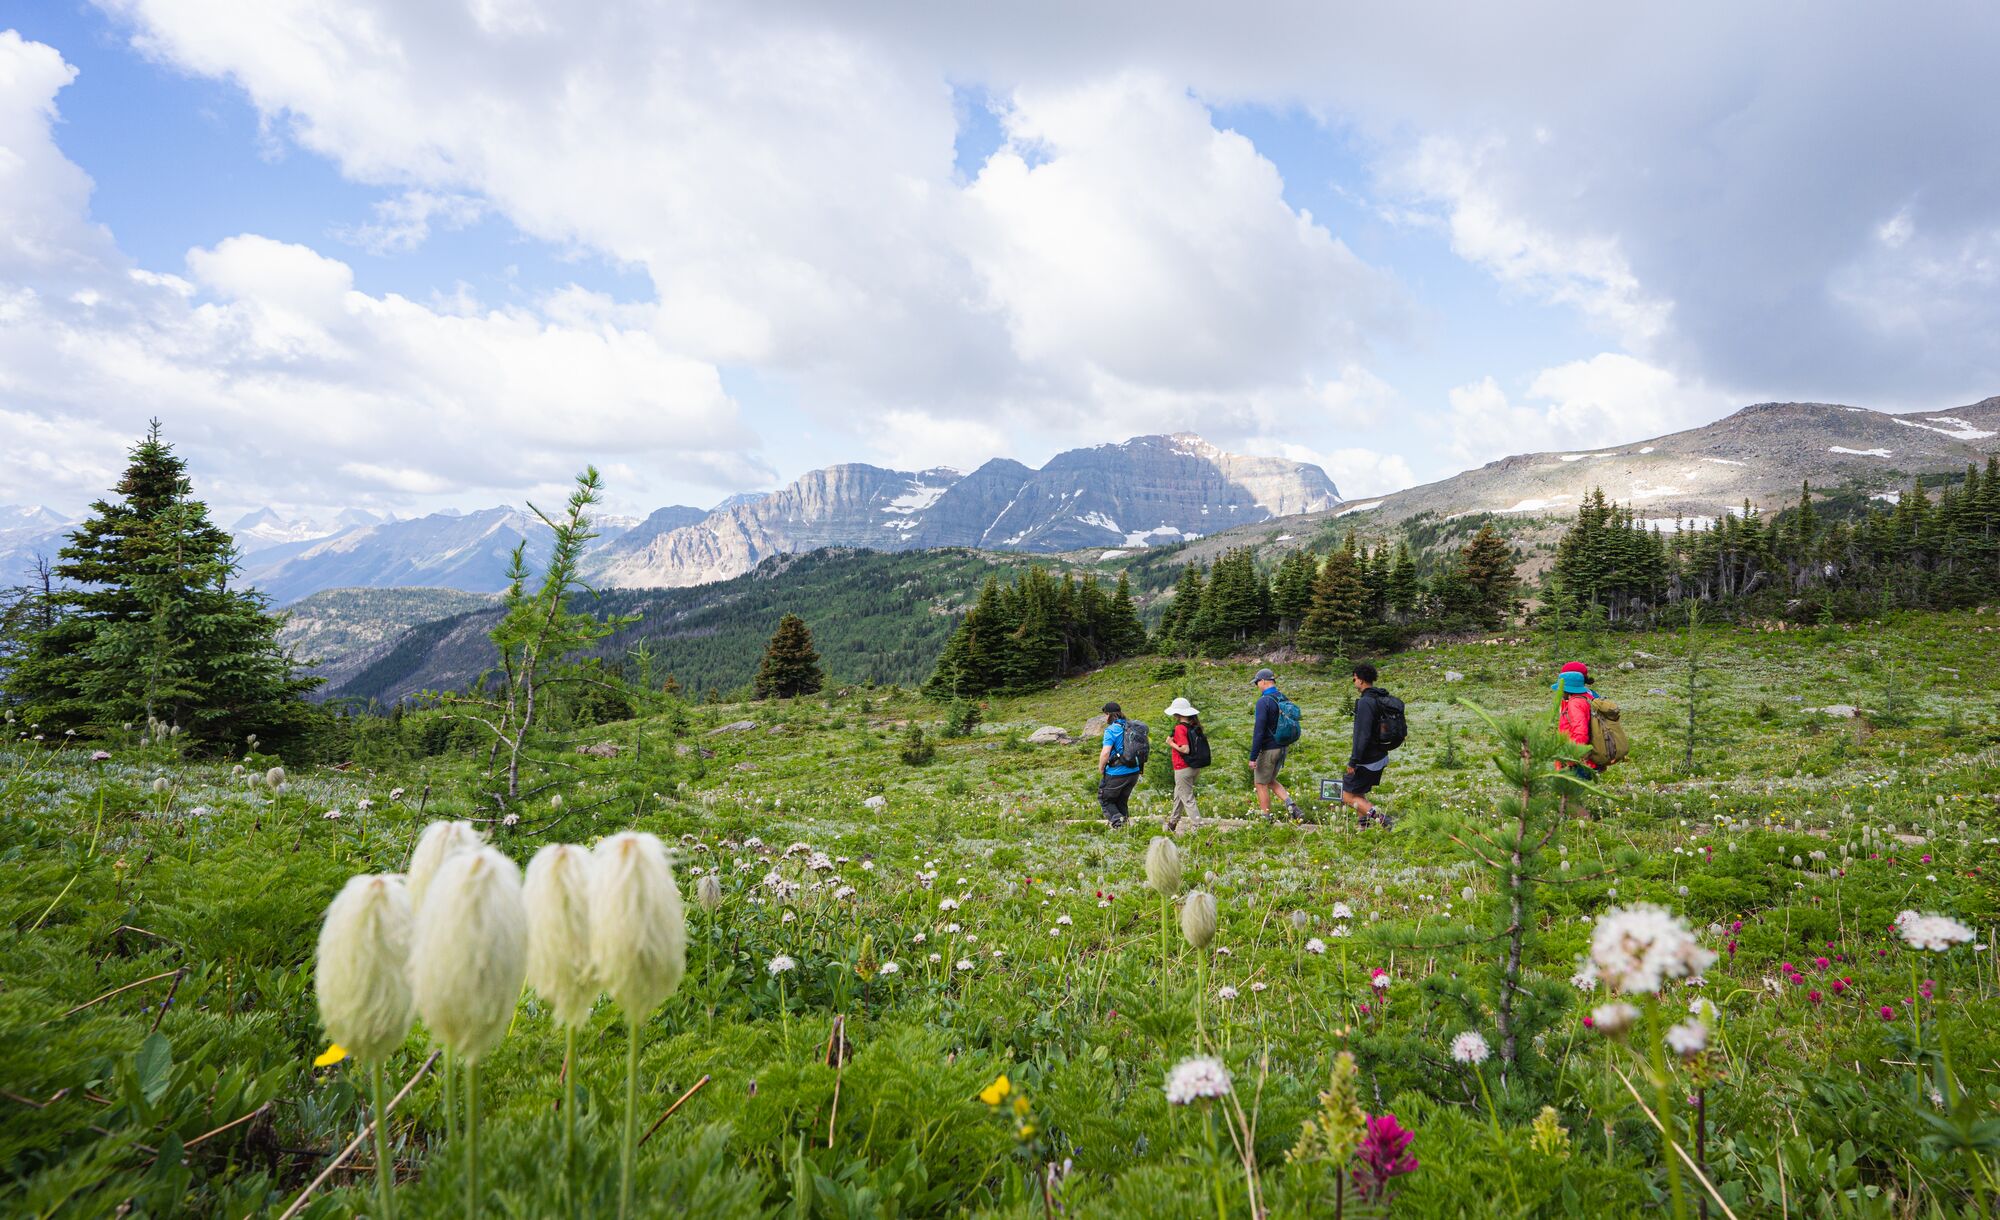 Wildflowers at Sunshine Meadows with hikers in the background near Banff National Park.